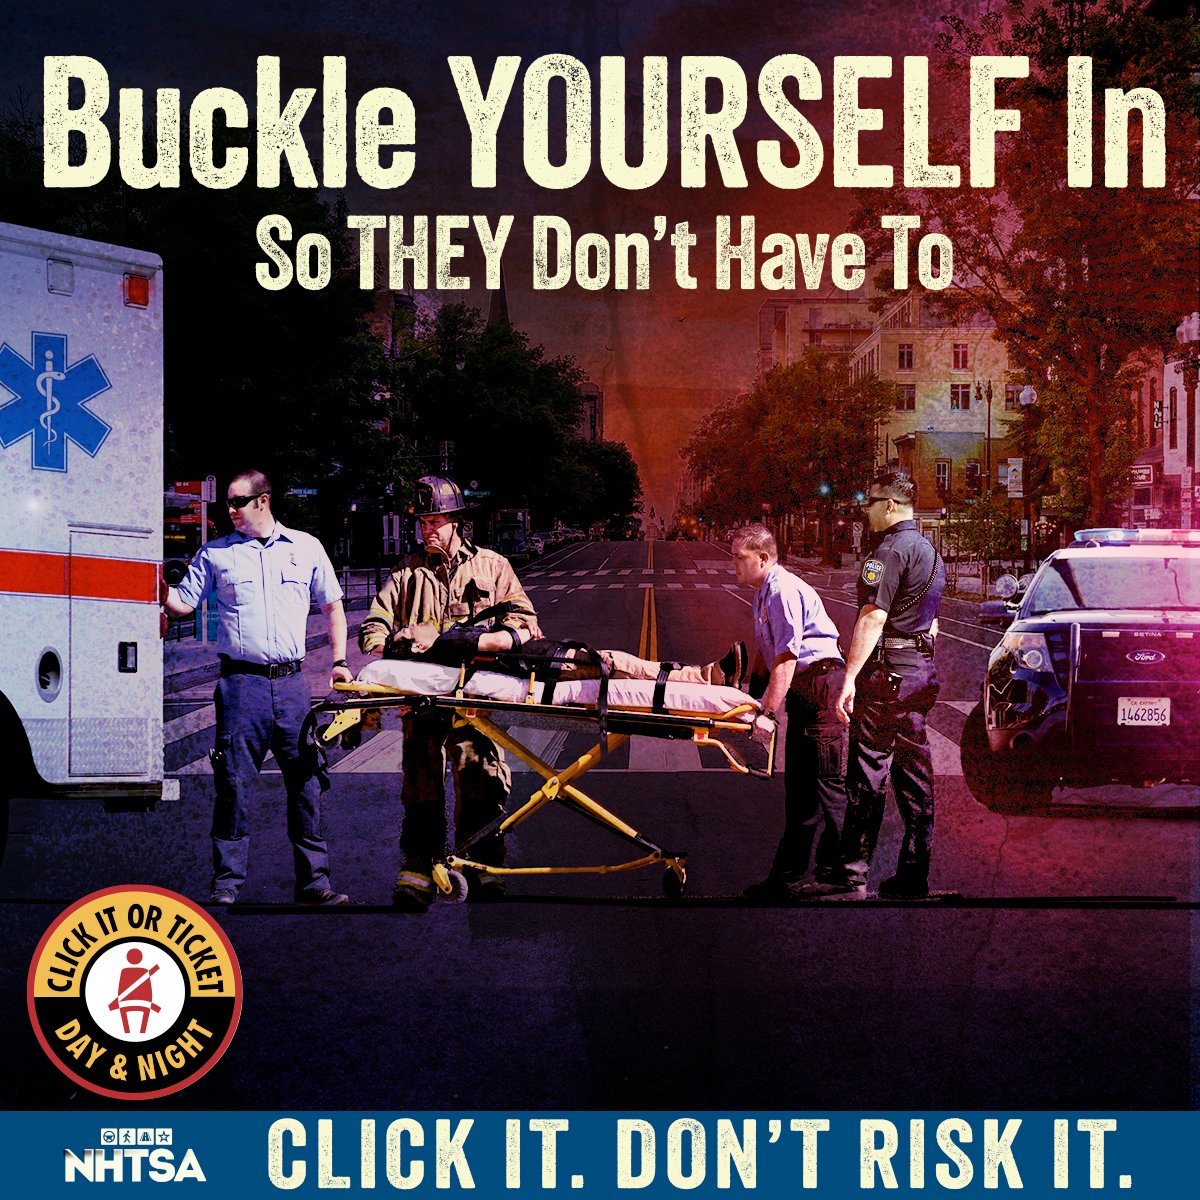 Save your own life with one quick click. #ClickItOrTicket #ClickItDontRiskIt #BeSafePA